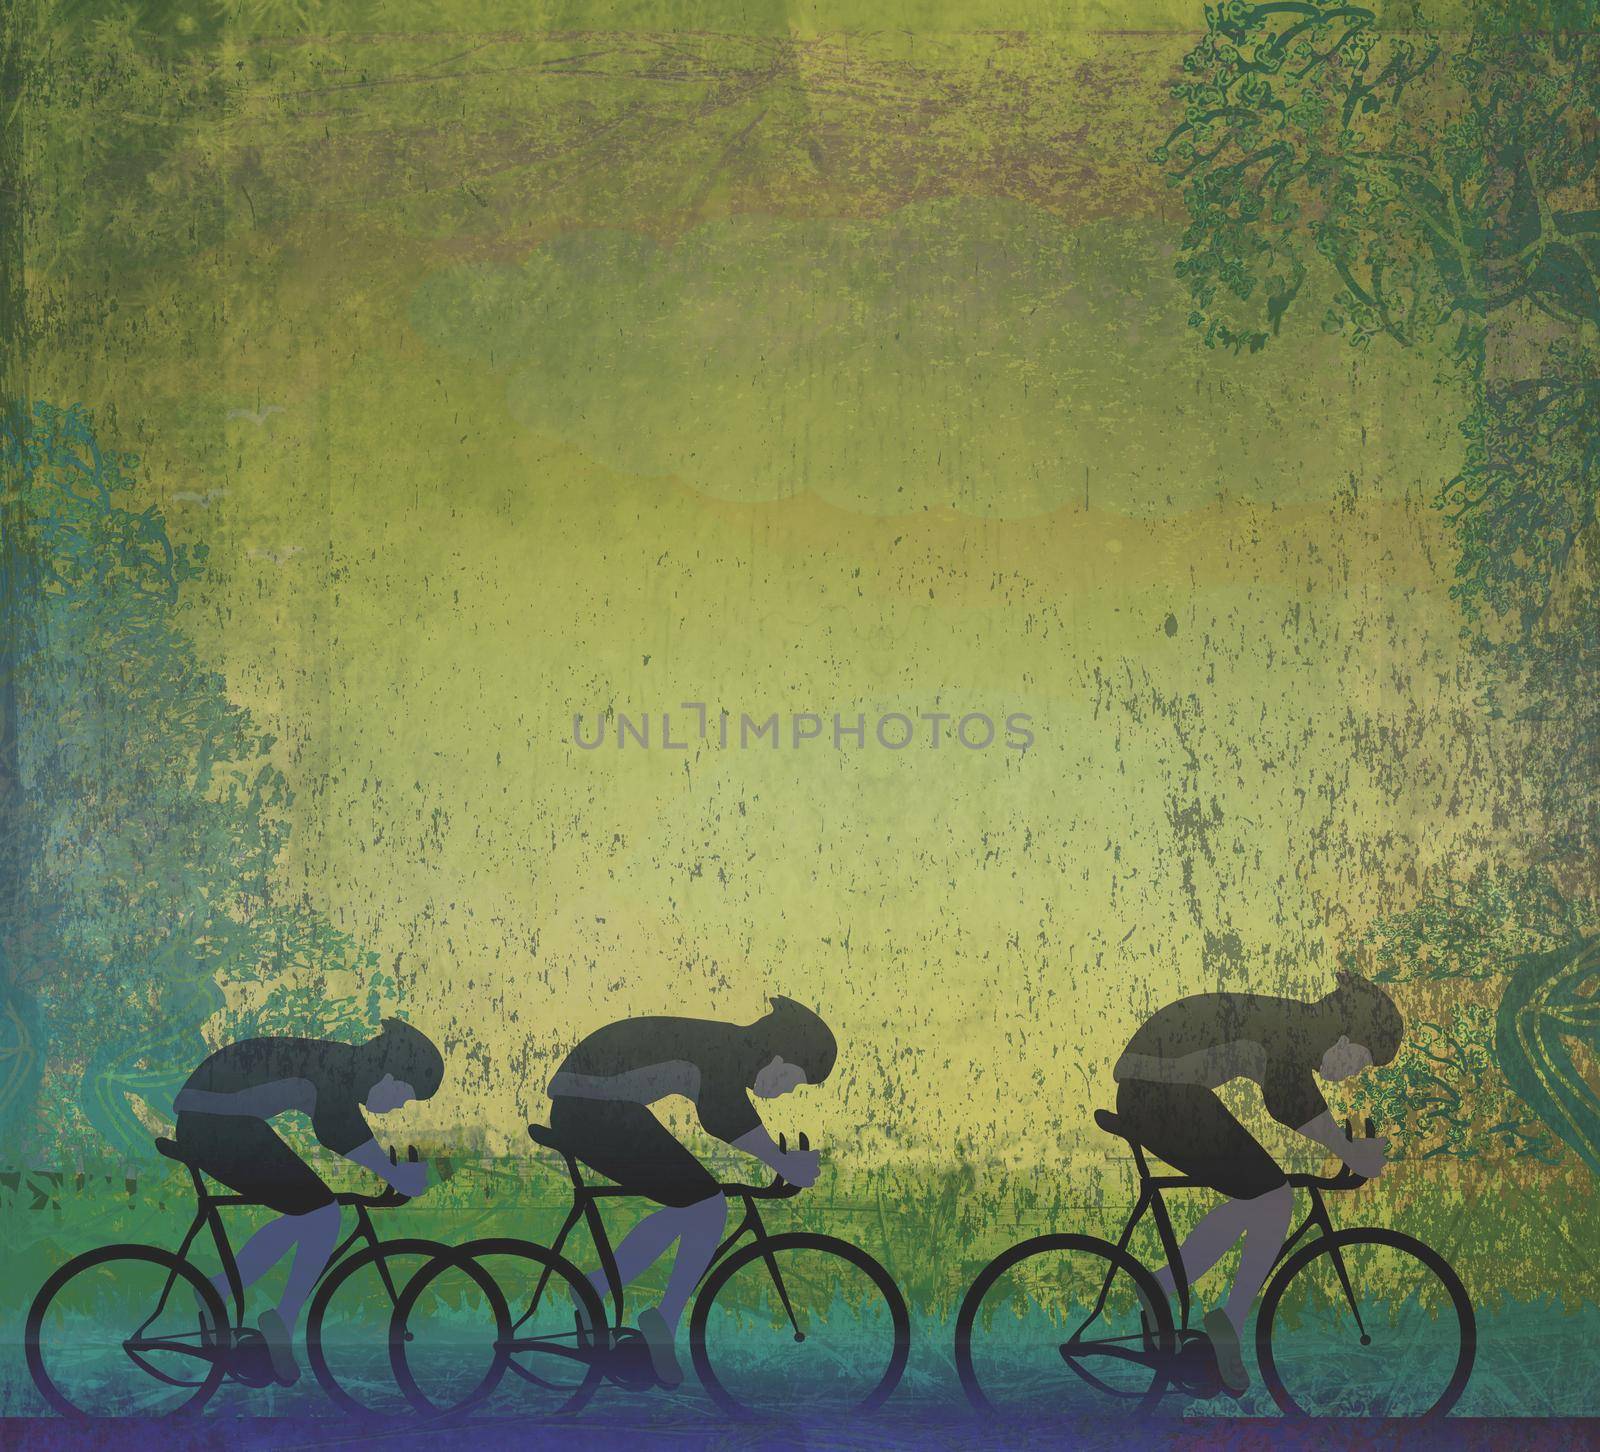 Cycling Grunge Poster Template by JackyBrown